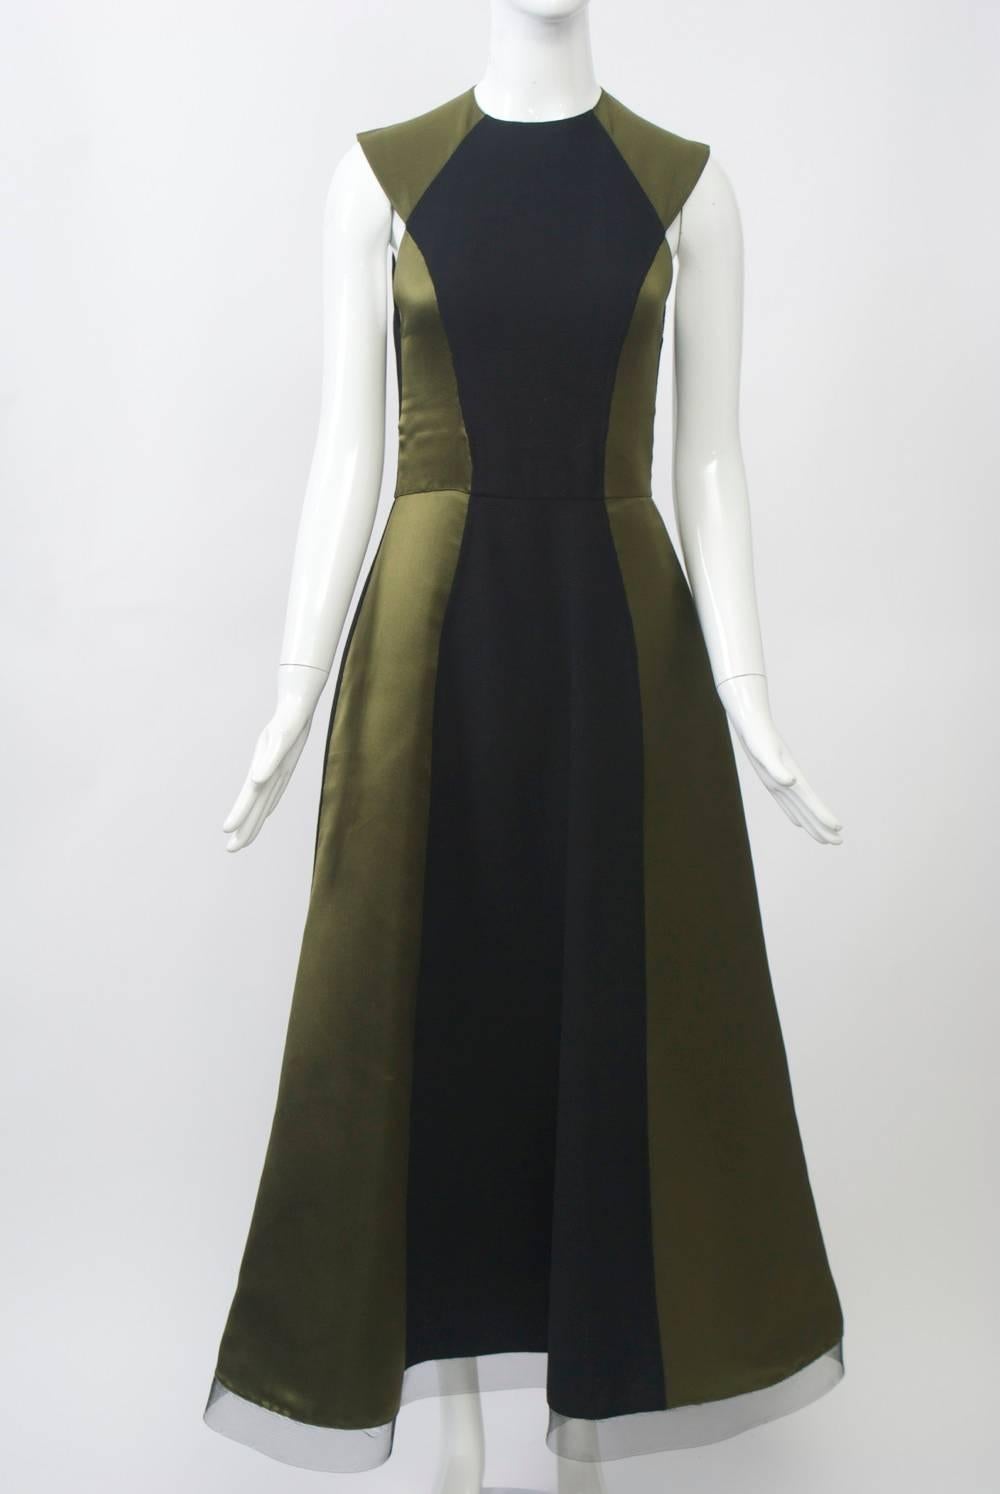 Quintessential Geoffrey Beene in cut and detail, this stunning and sophisticated gown is composed of olive green satin with black wool crepe panels strategically integrated into the design and following the intricate seaming and shape of the dress.